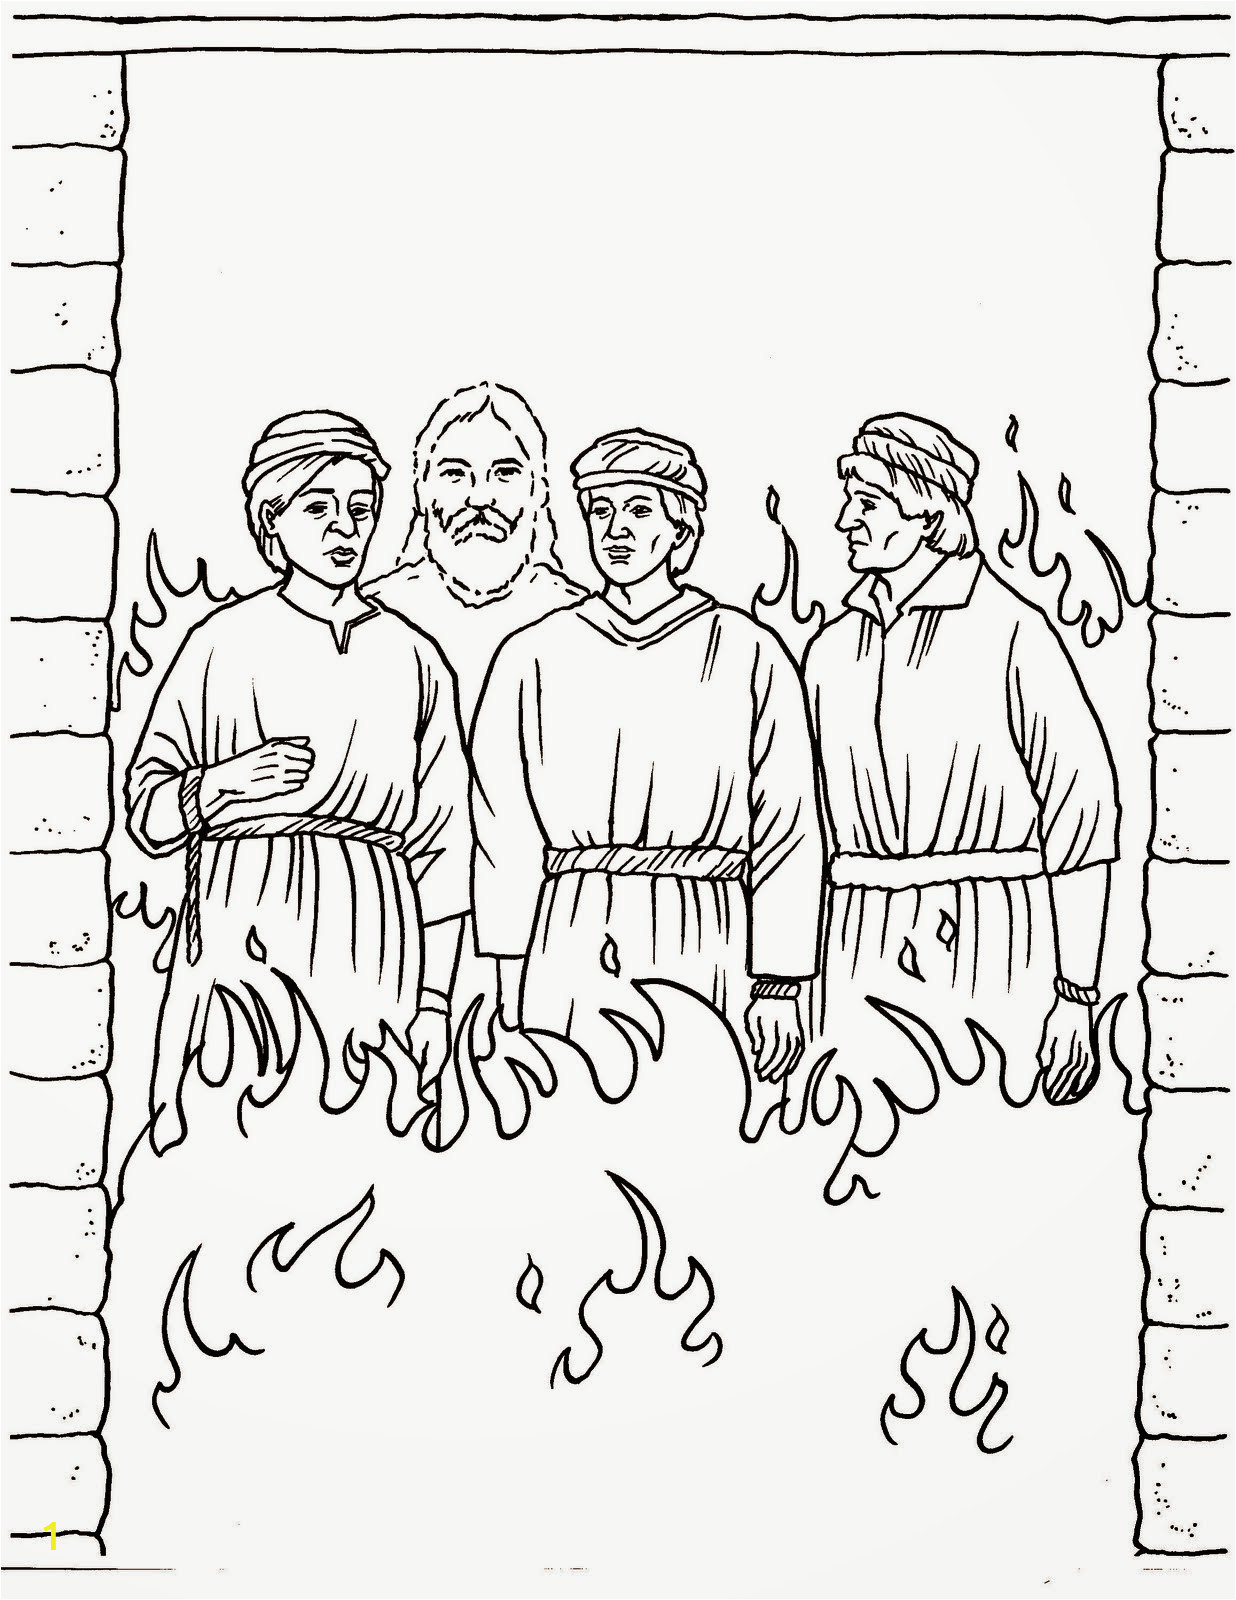 shadrach meshach and abednego coloring page